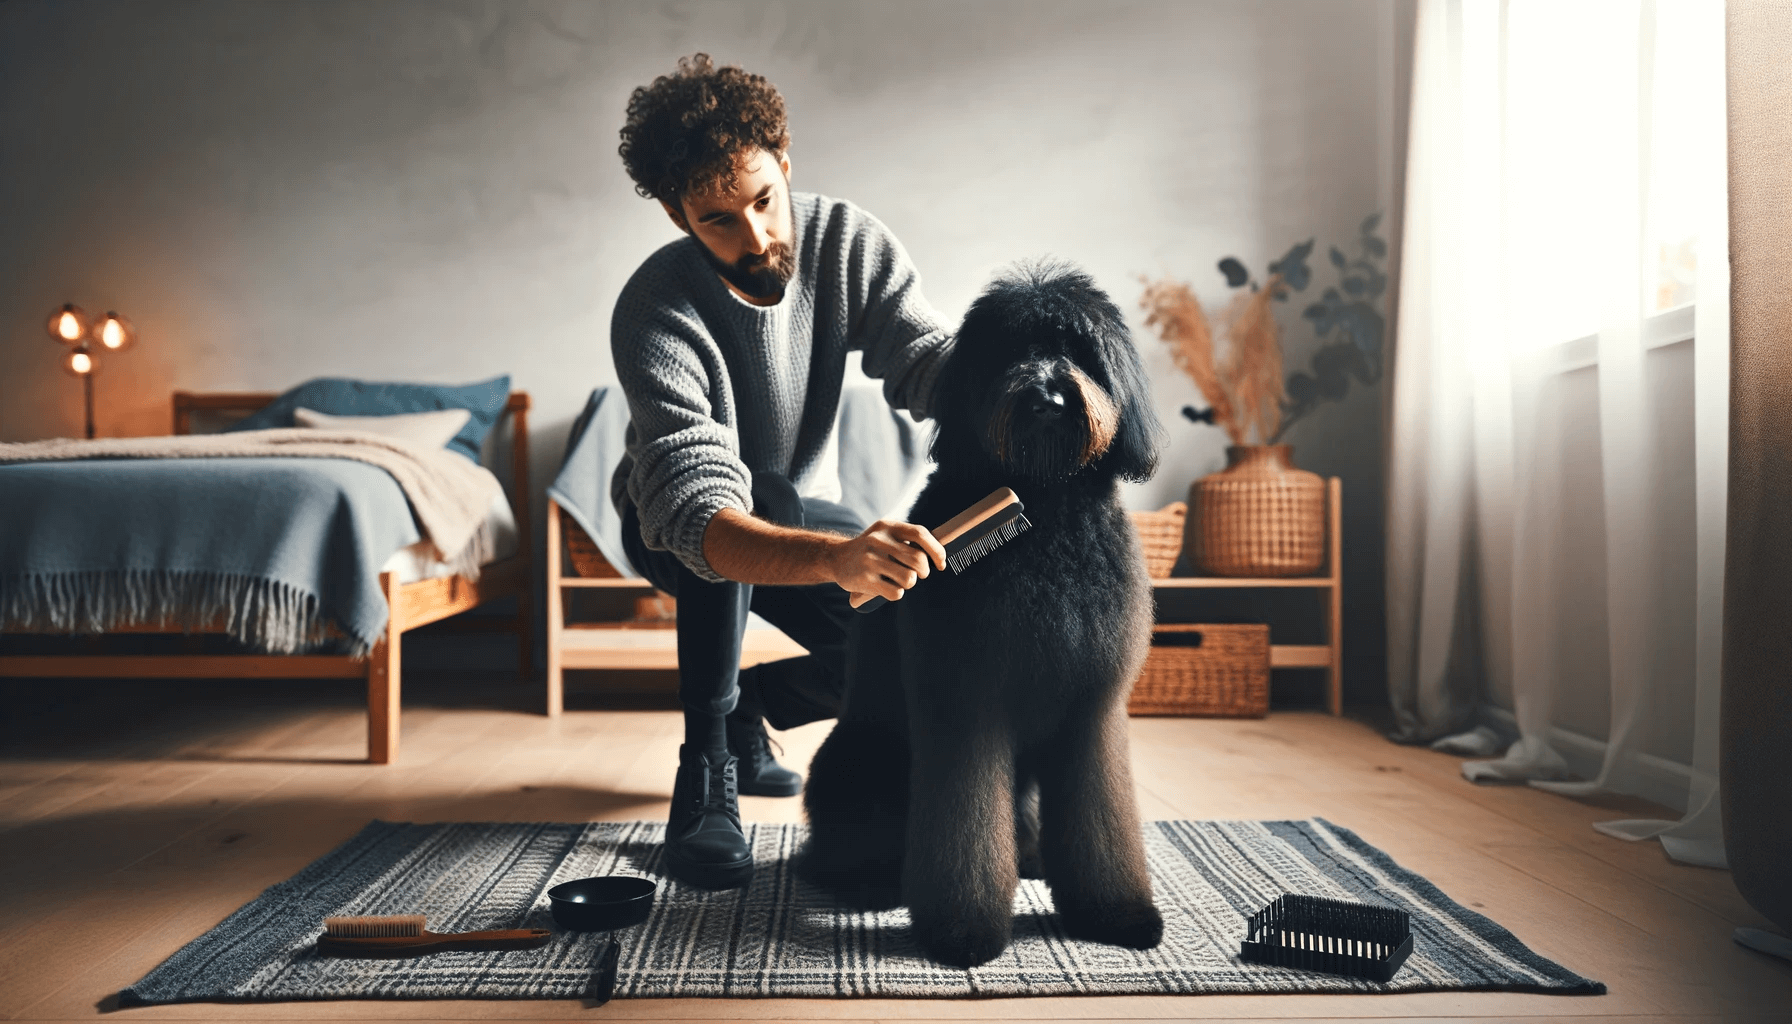 Black Aussiedoodle being groomed by its owner at home, showcasing the moment the owner brushes the dog's curly black coat